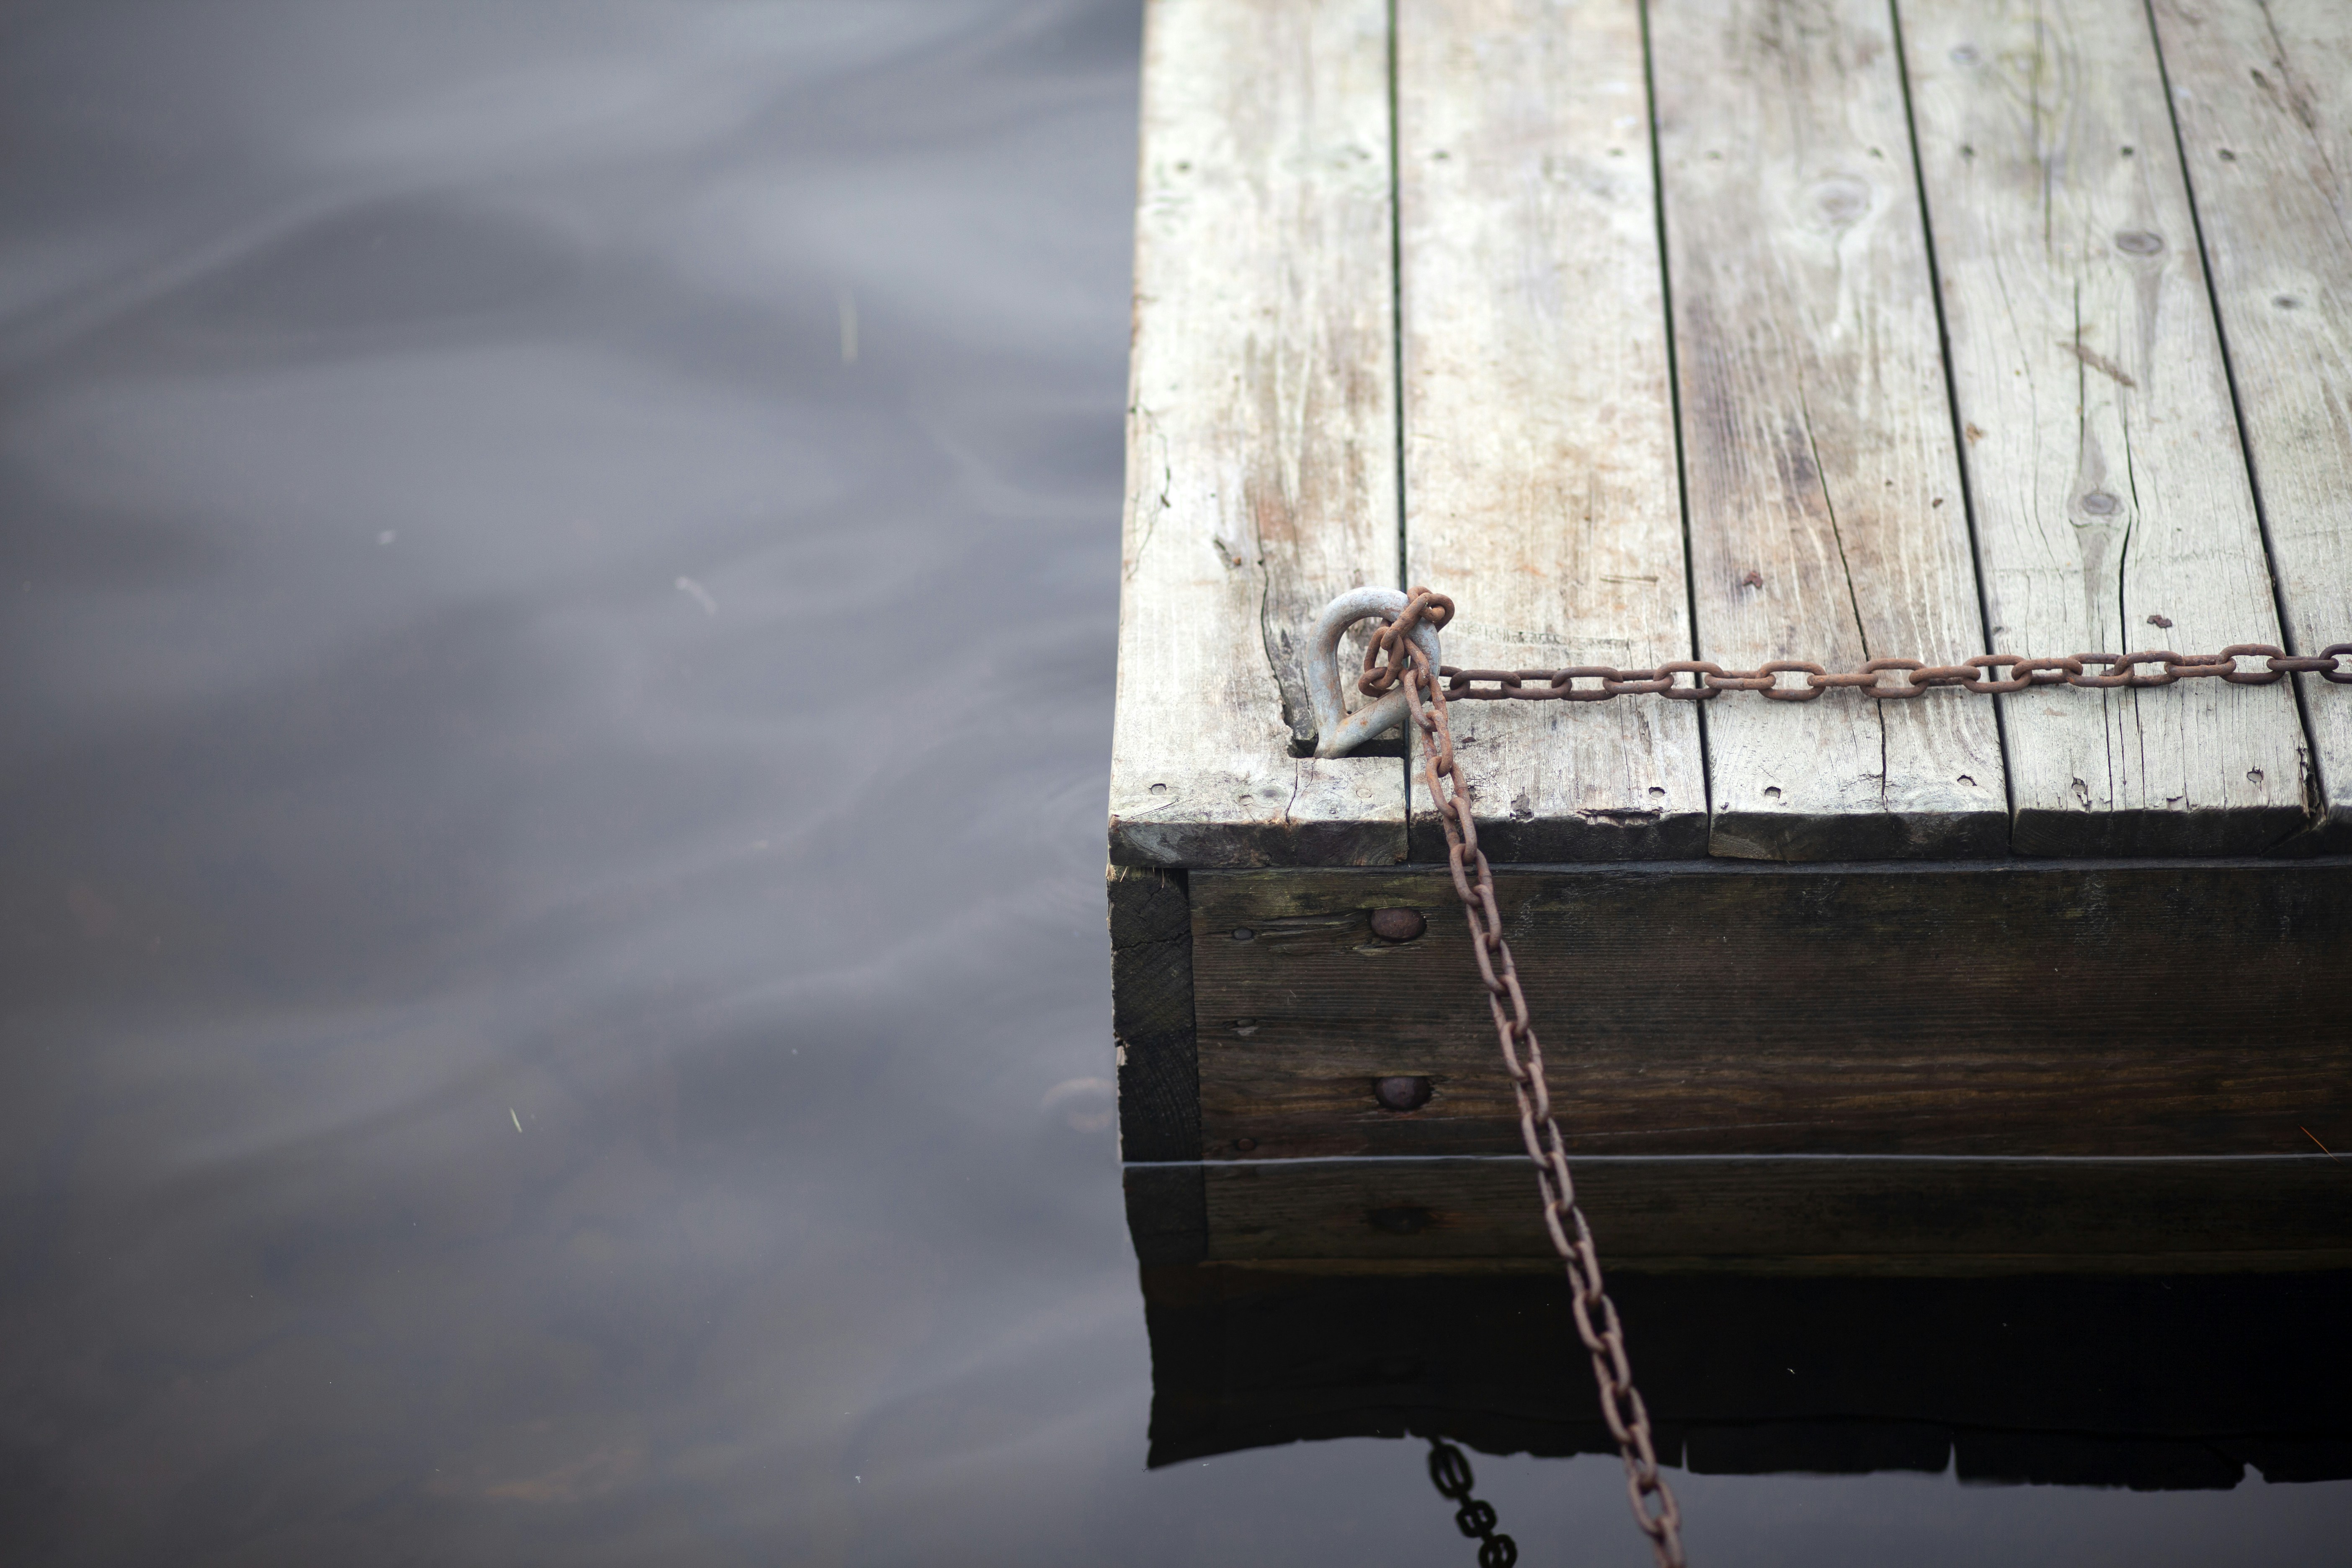 On an overcast day, I saw this chain going out onto a small, worn dock. No boats, no splashing - just quiet.